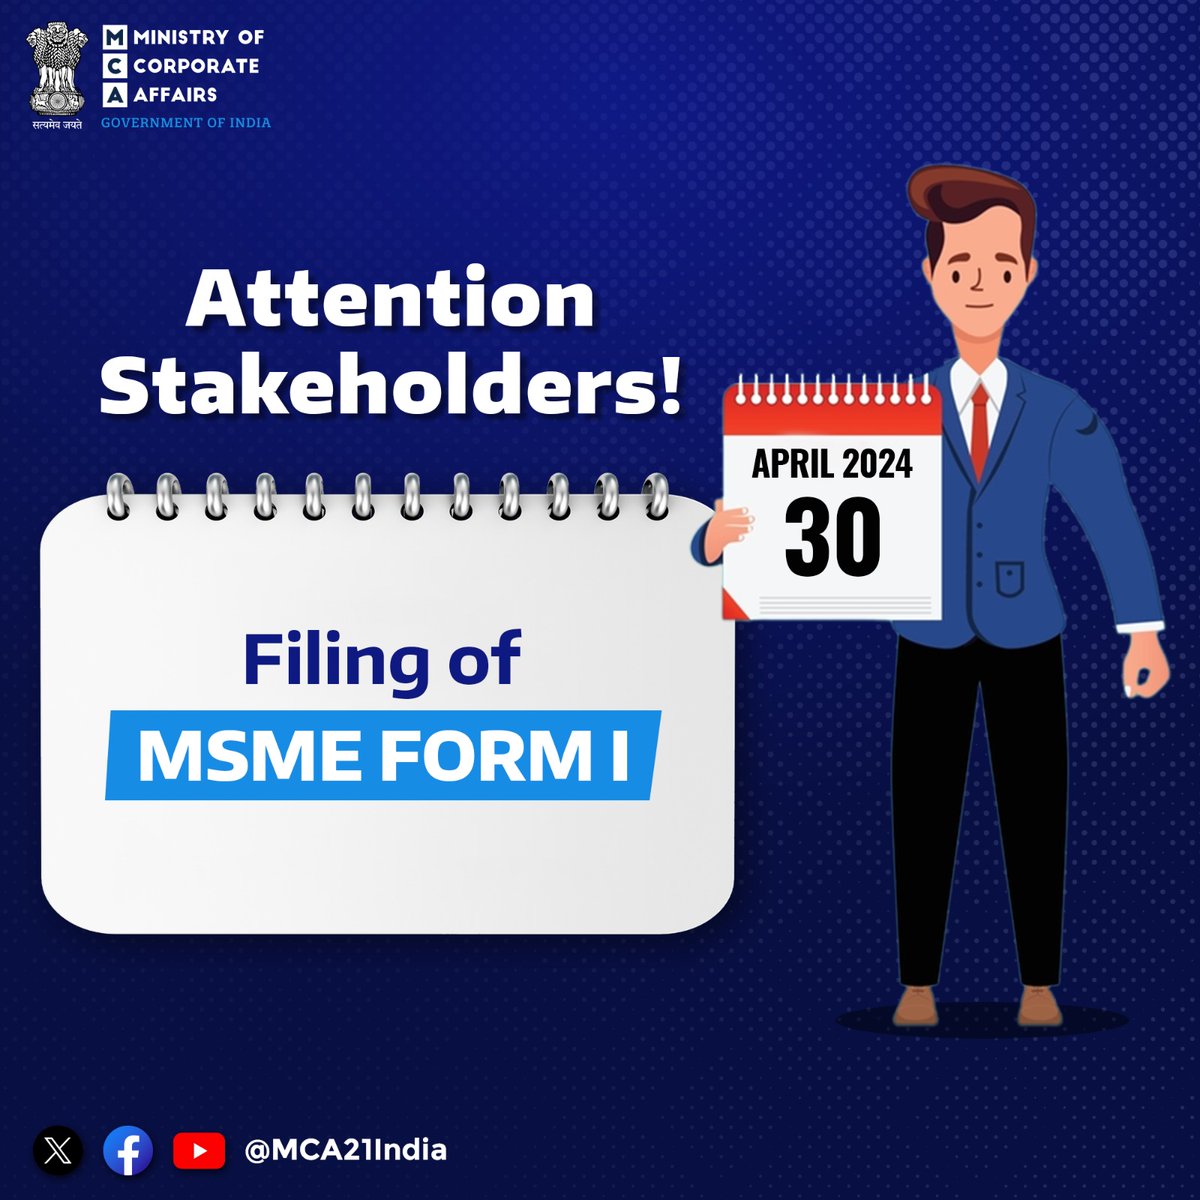 To avoid last-minute rush on the MCA portal for filing 'MSME Form I', stakeholders are requested to complete their filing well before their due date. #MCA #MCA21 #Update #Stakeholders #Form #MSME